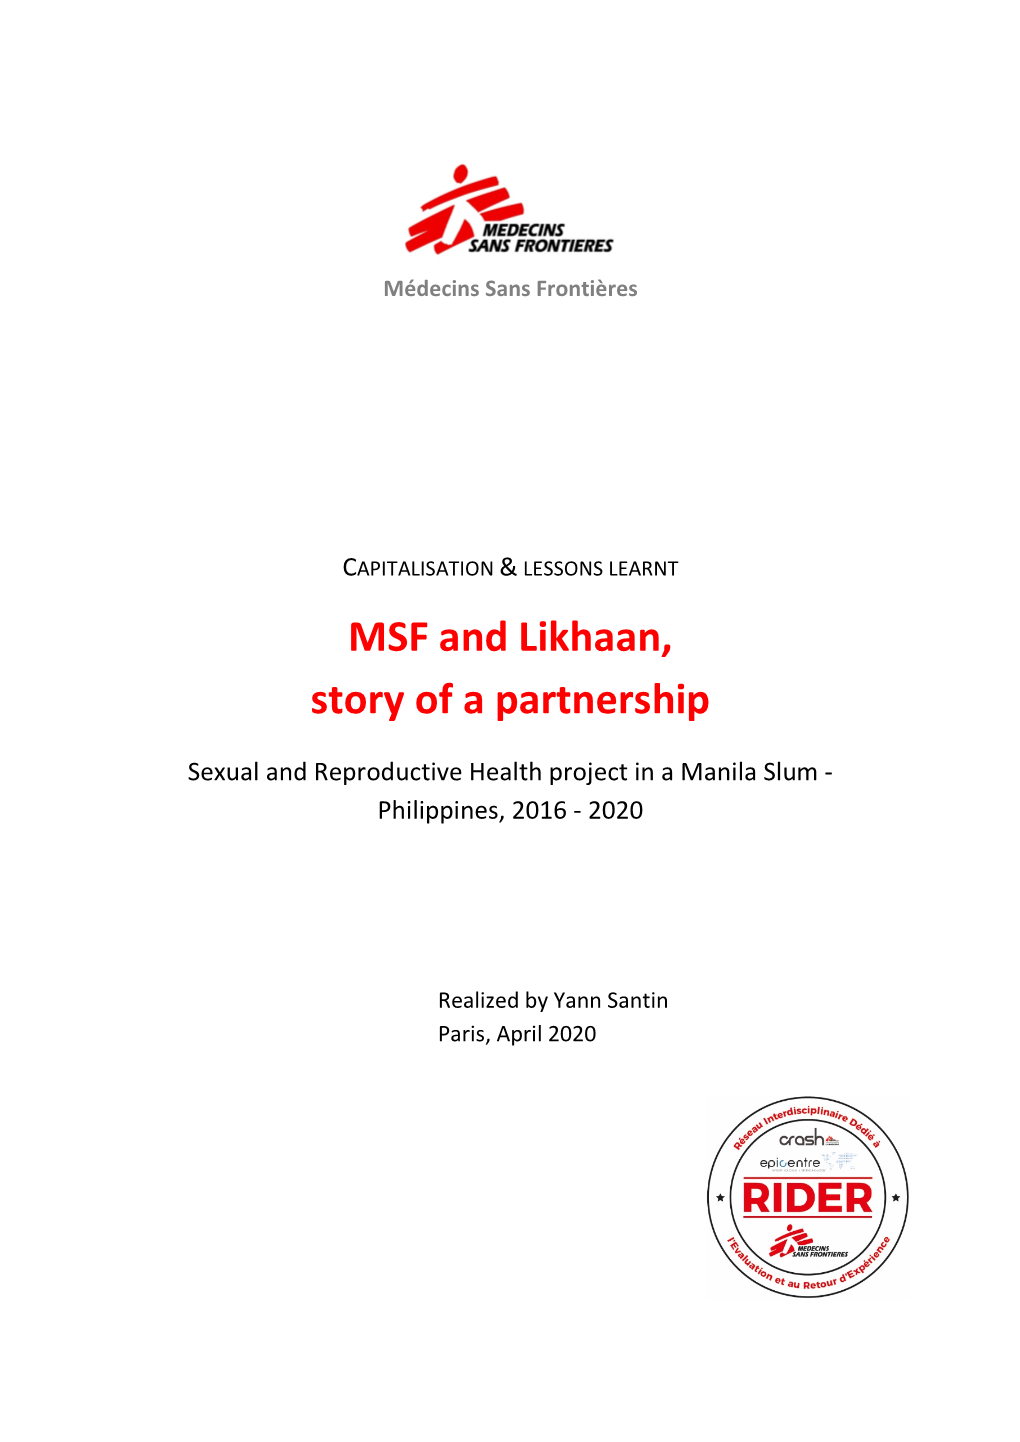 MSF and Likhaan, Story of a Partnership